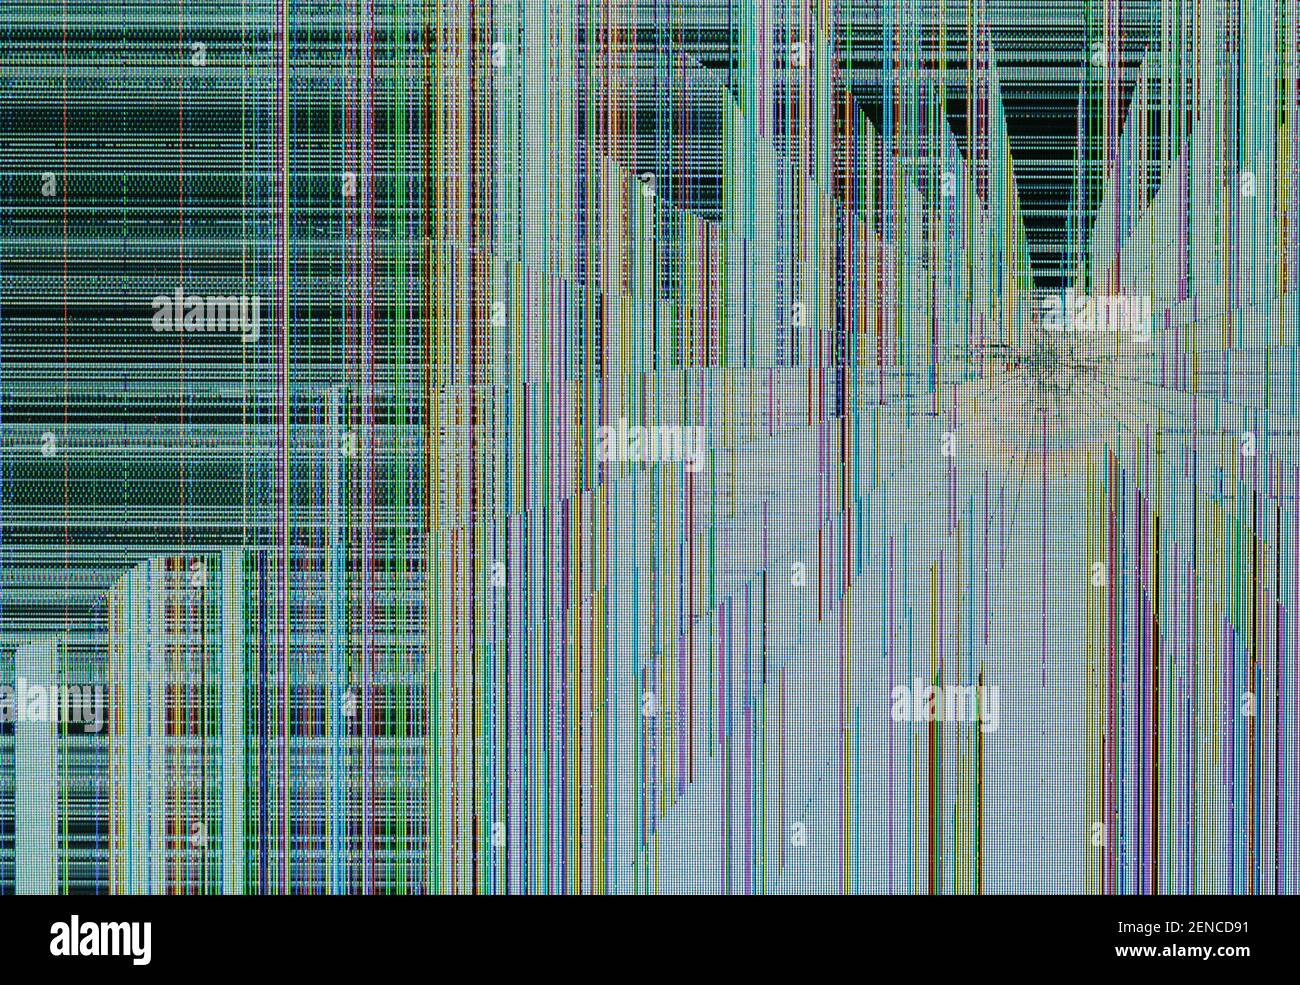 Broken TV lcd screen. Abstract background Stock Photo - Alamy